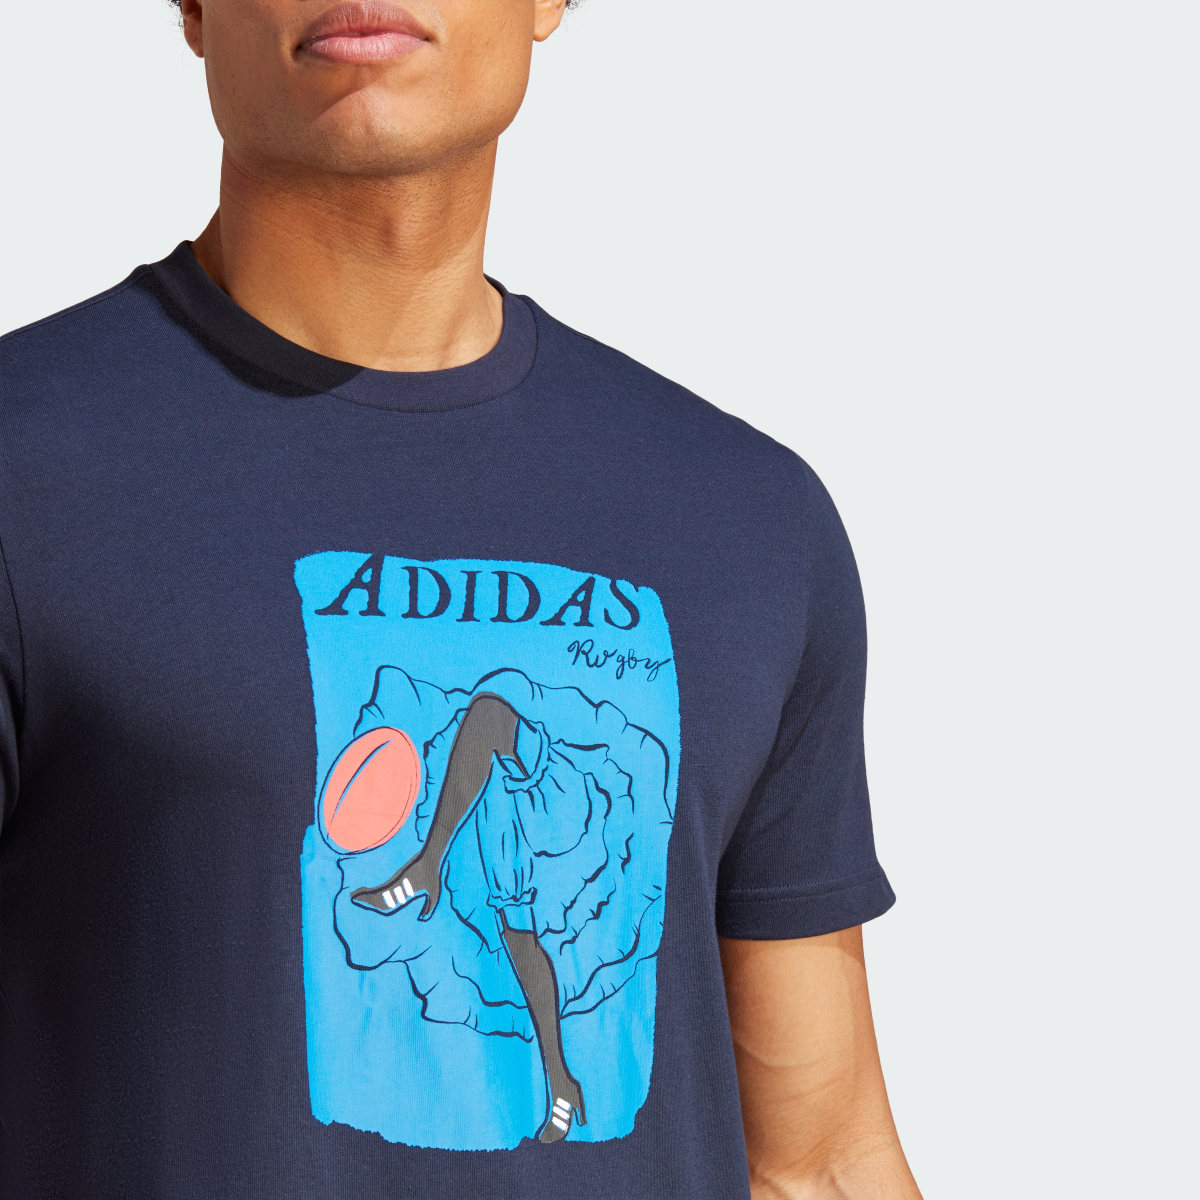 Adidas T-shirt graphique Rugby Cancan. 6